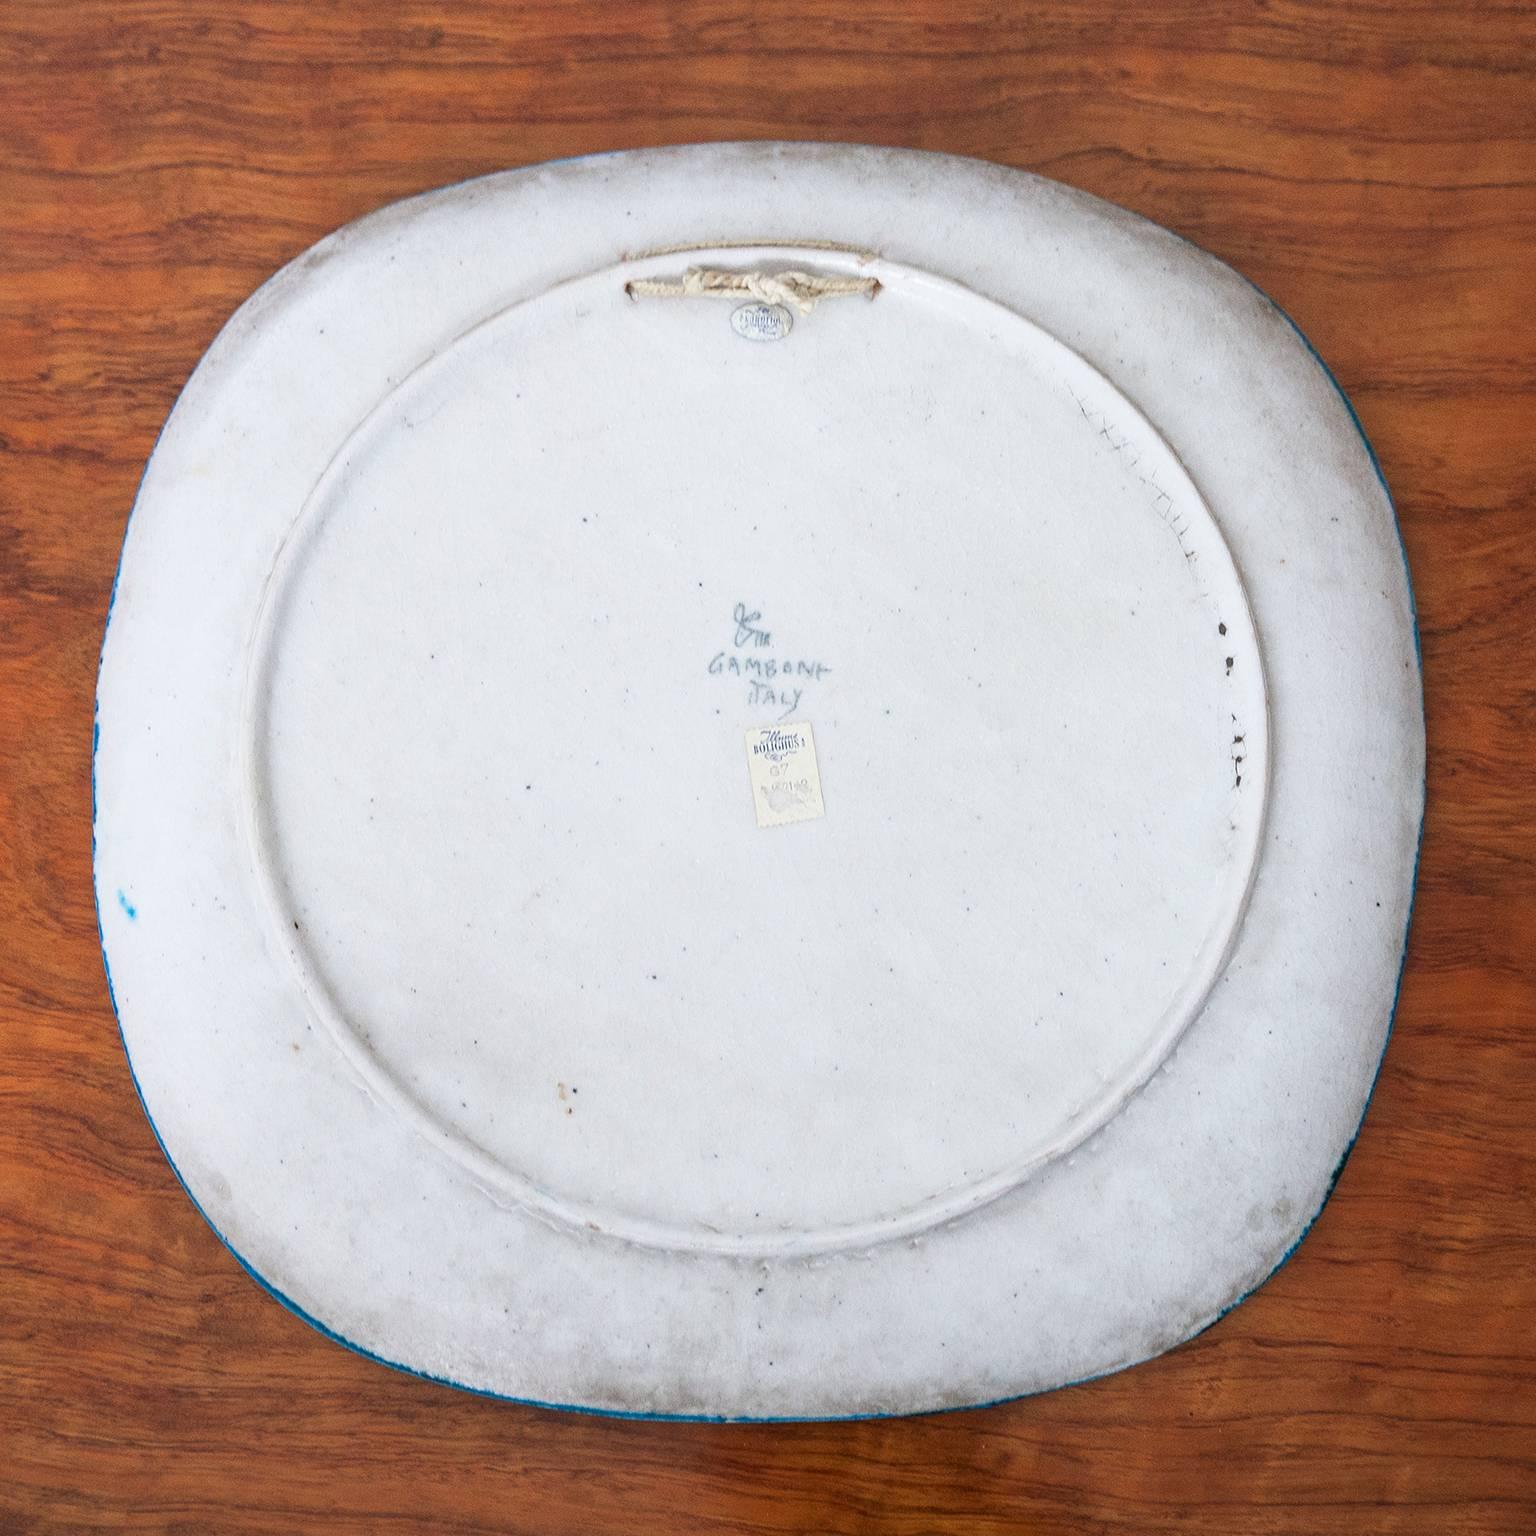 Huge Guido Gambone, polychrome earthenware plate, signed with Gambone and the Donkey Mark.
Measures: H 3.8, B 40, D 40 cm.